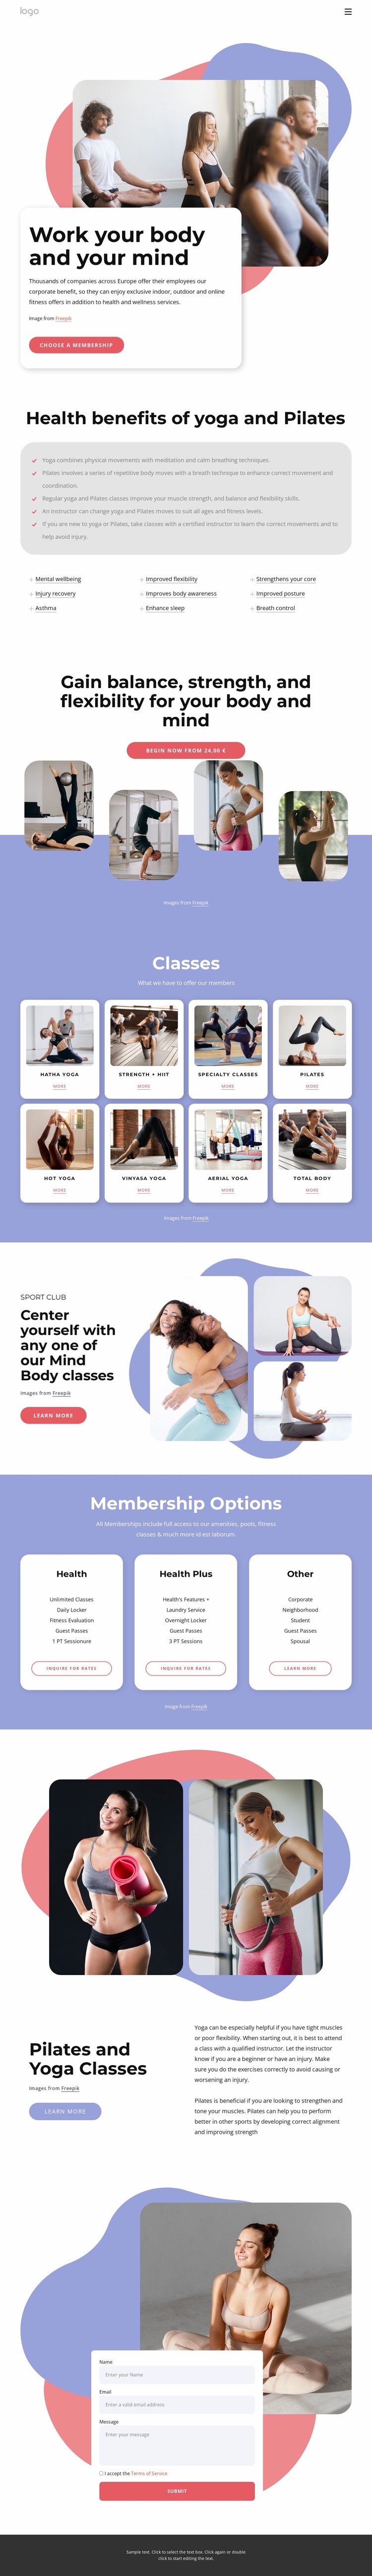 Pilates and yoga classes Website Template